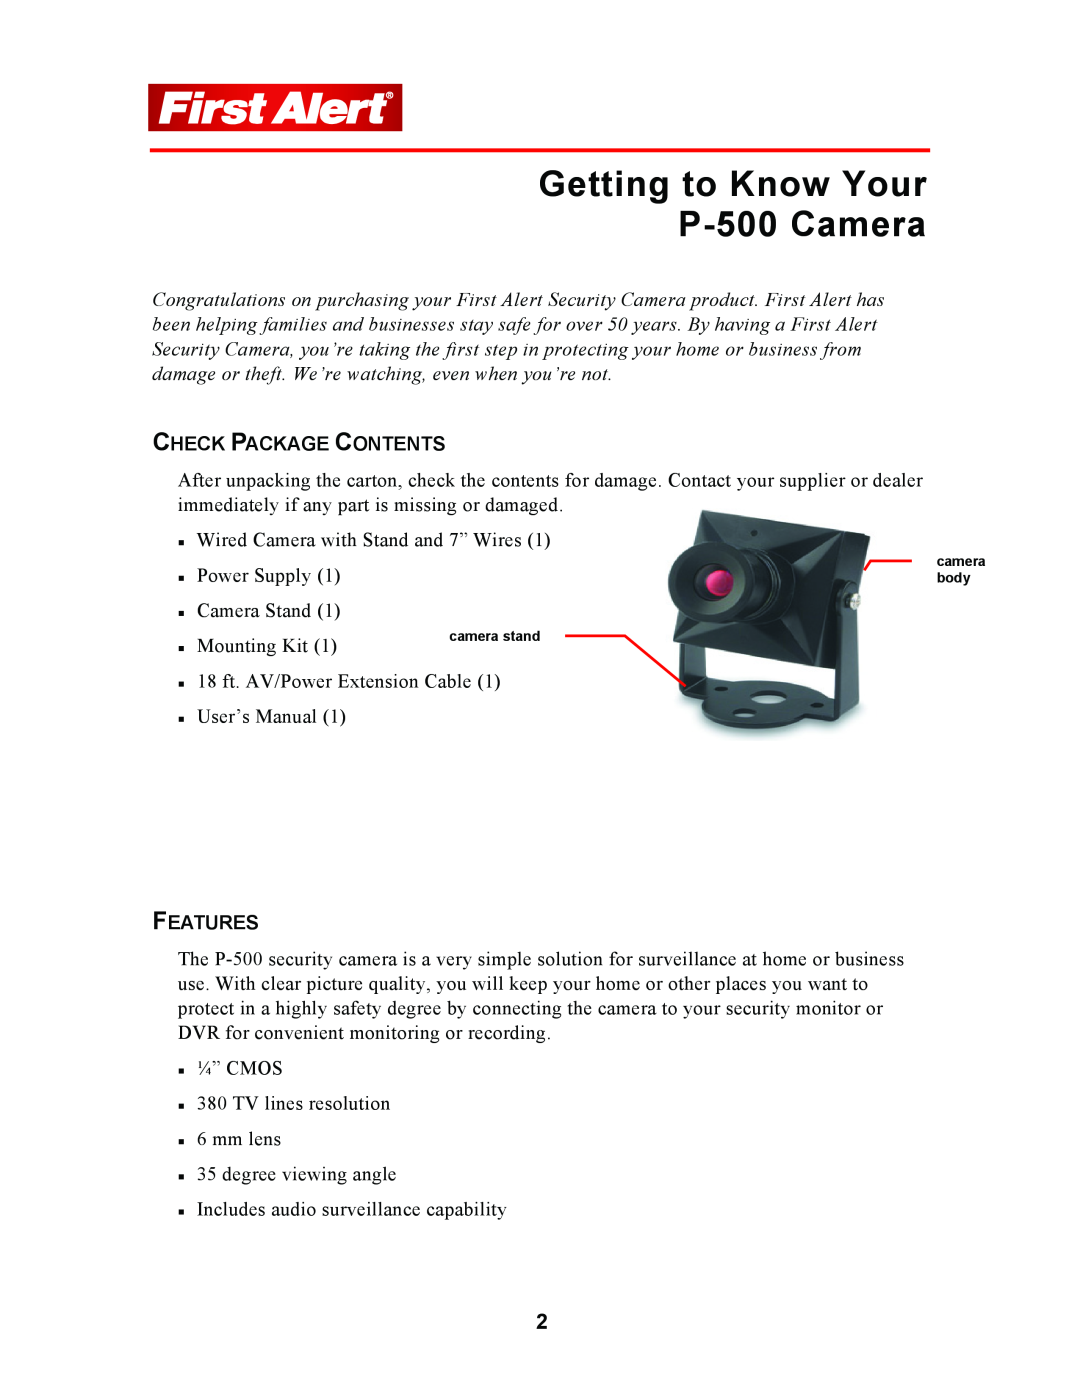 First Alert user manual Getting to Know Your P-500Camera, Check Package Contents, Features 